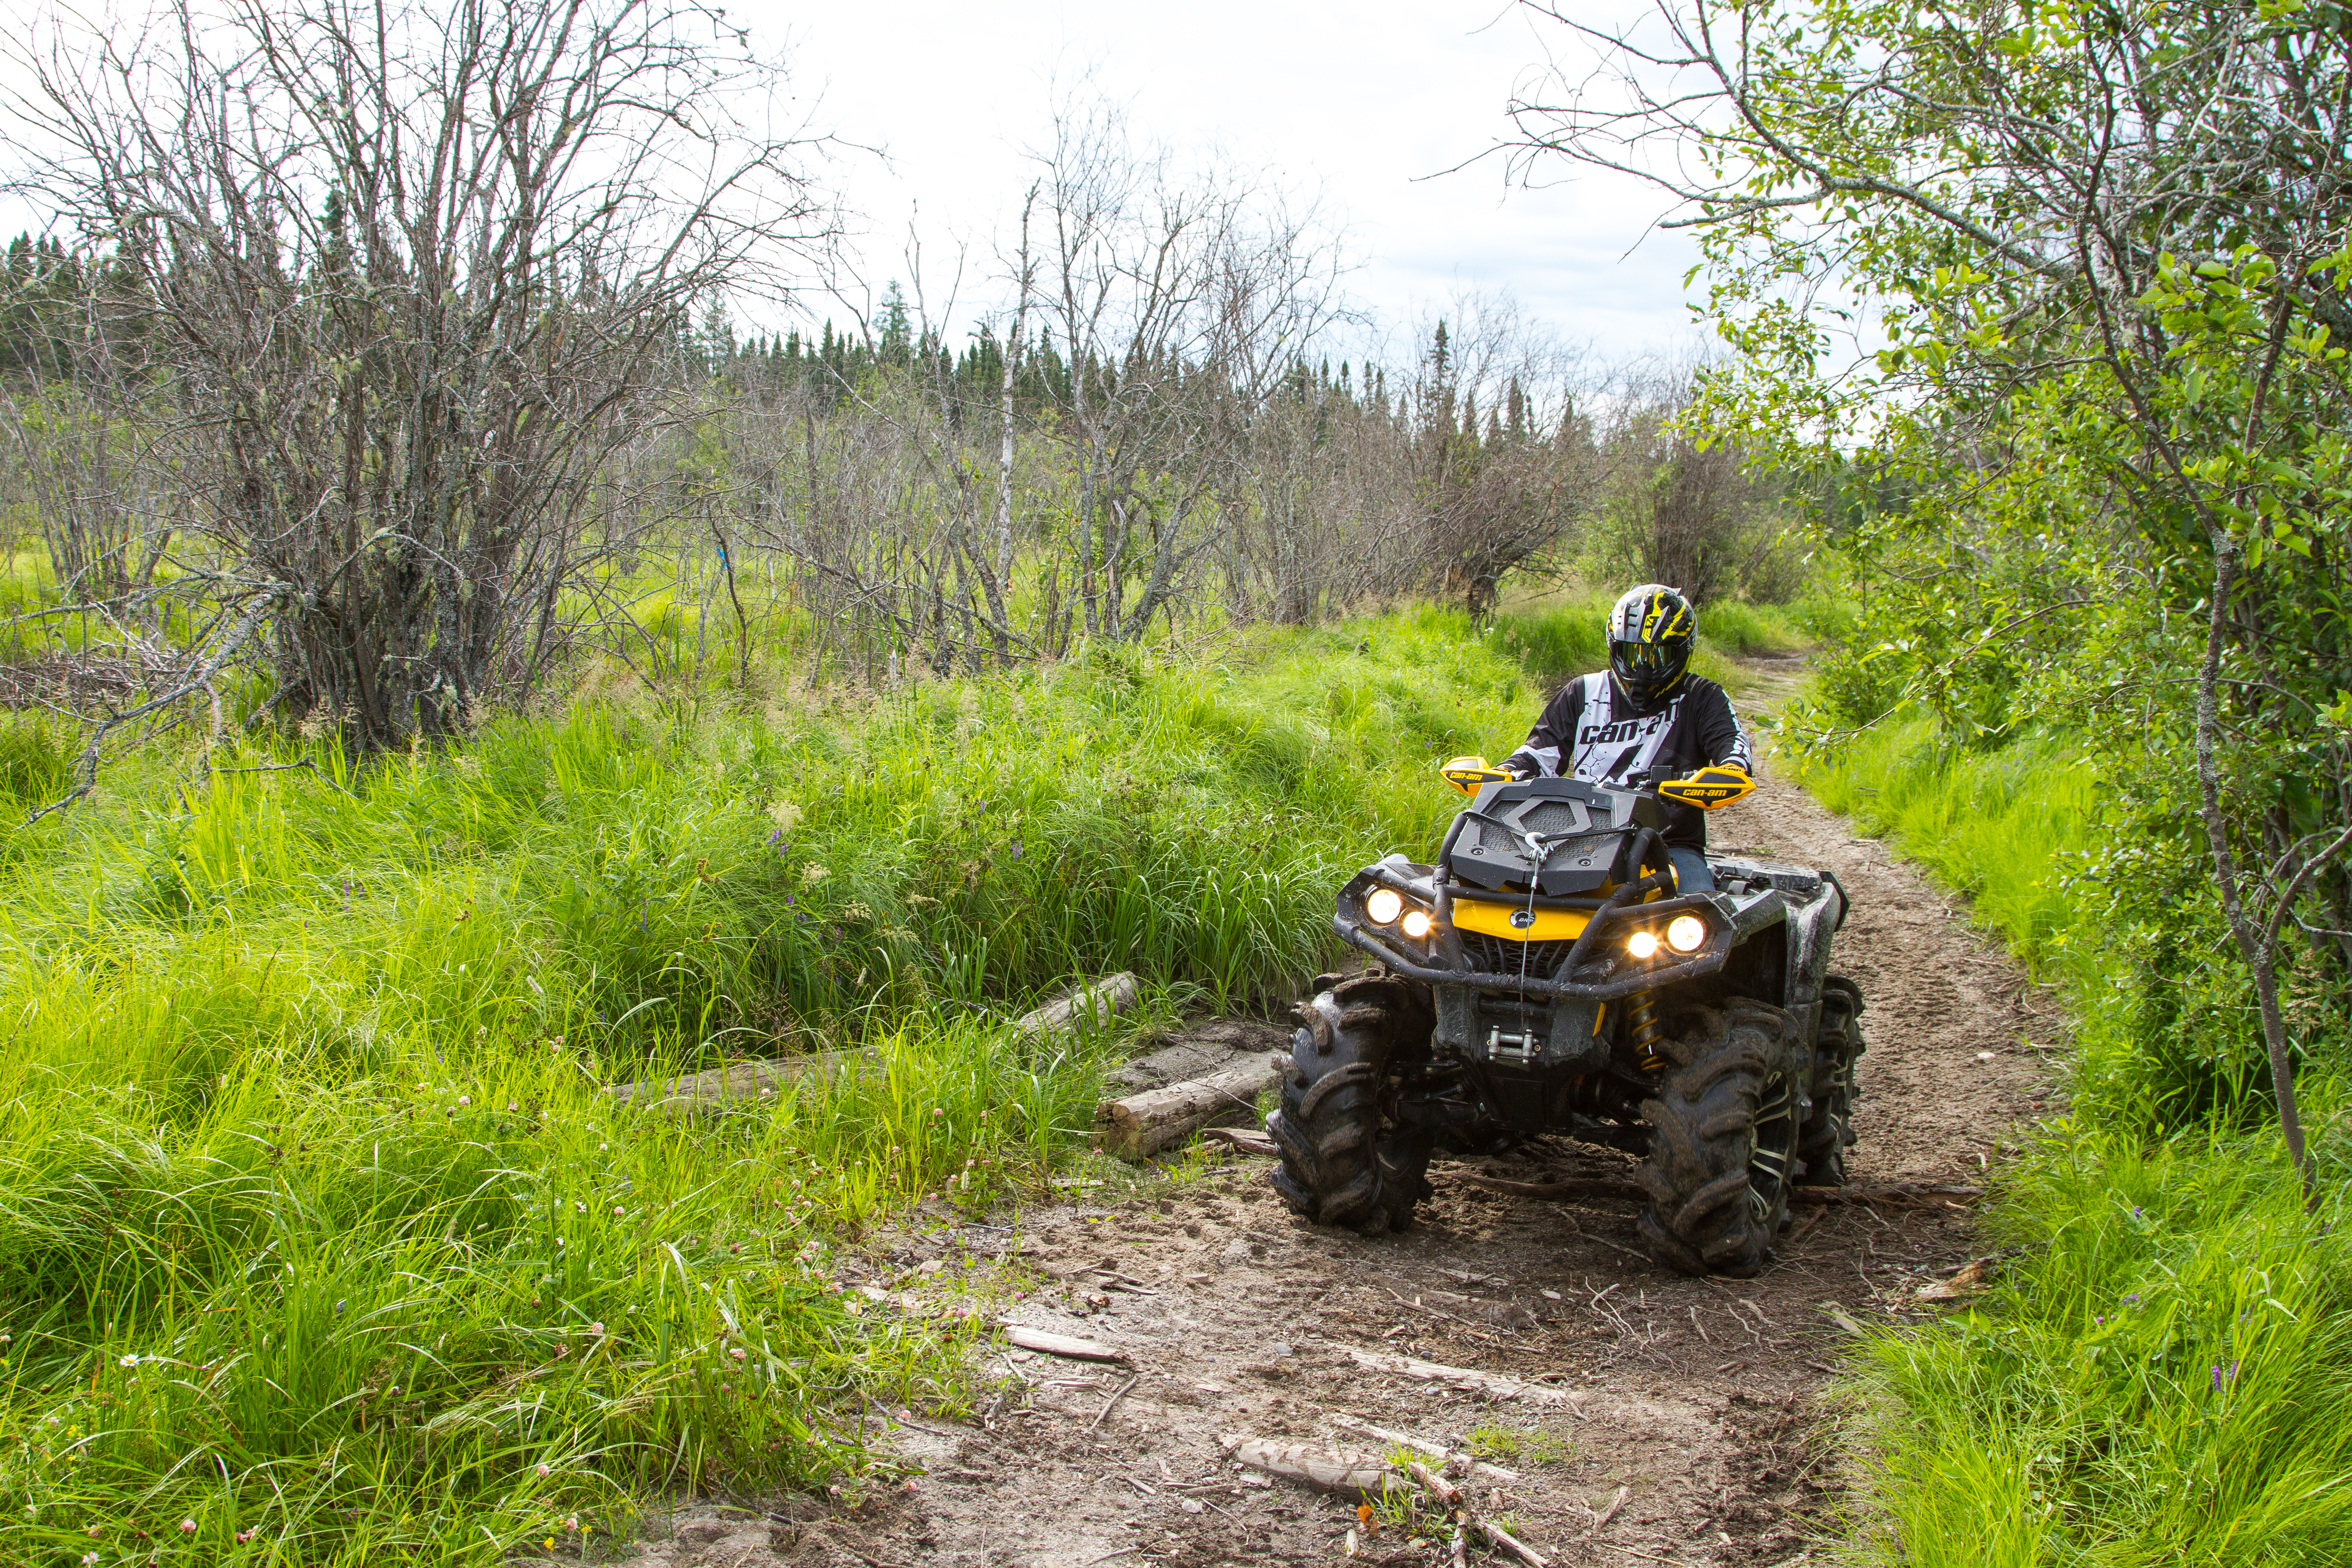 A person on an ATV riding down a muddy trail surrounded by lush greenery.